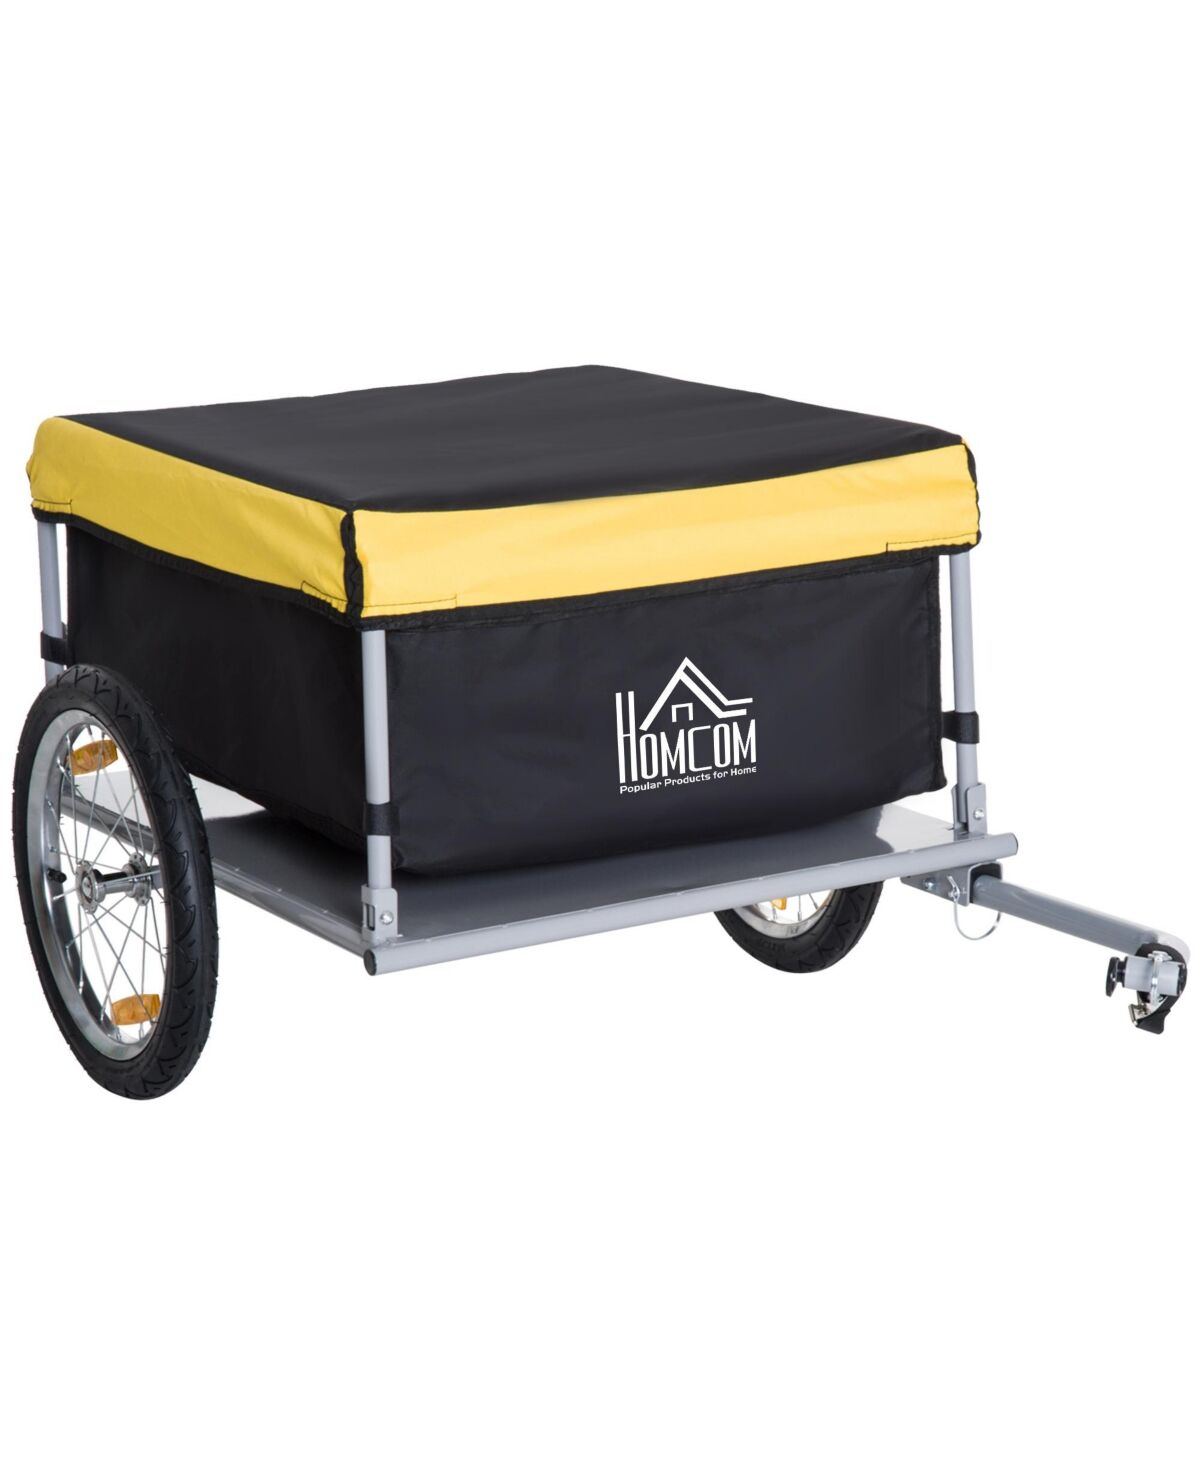 Homcom Bicycle Cargo Trailer, Two-Wheel Bike Luggage Wagon Bicycle Trailer with Removable Cover, Yellow - Yellow and black